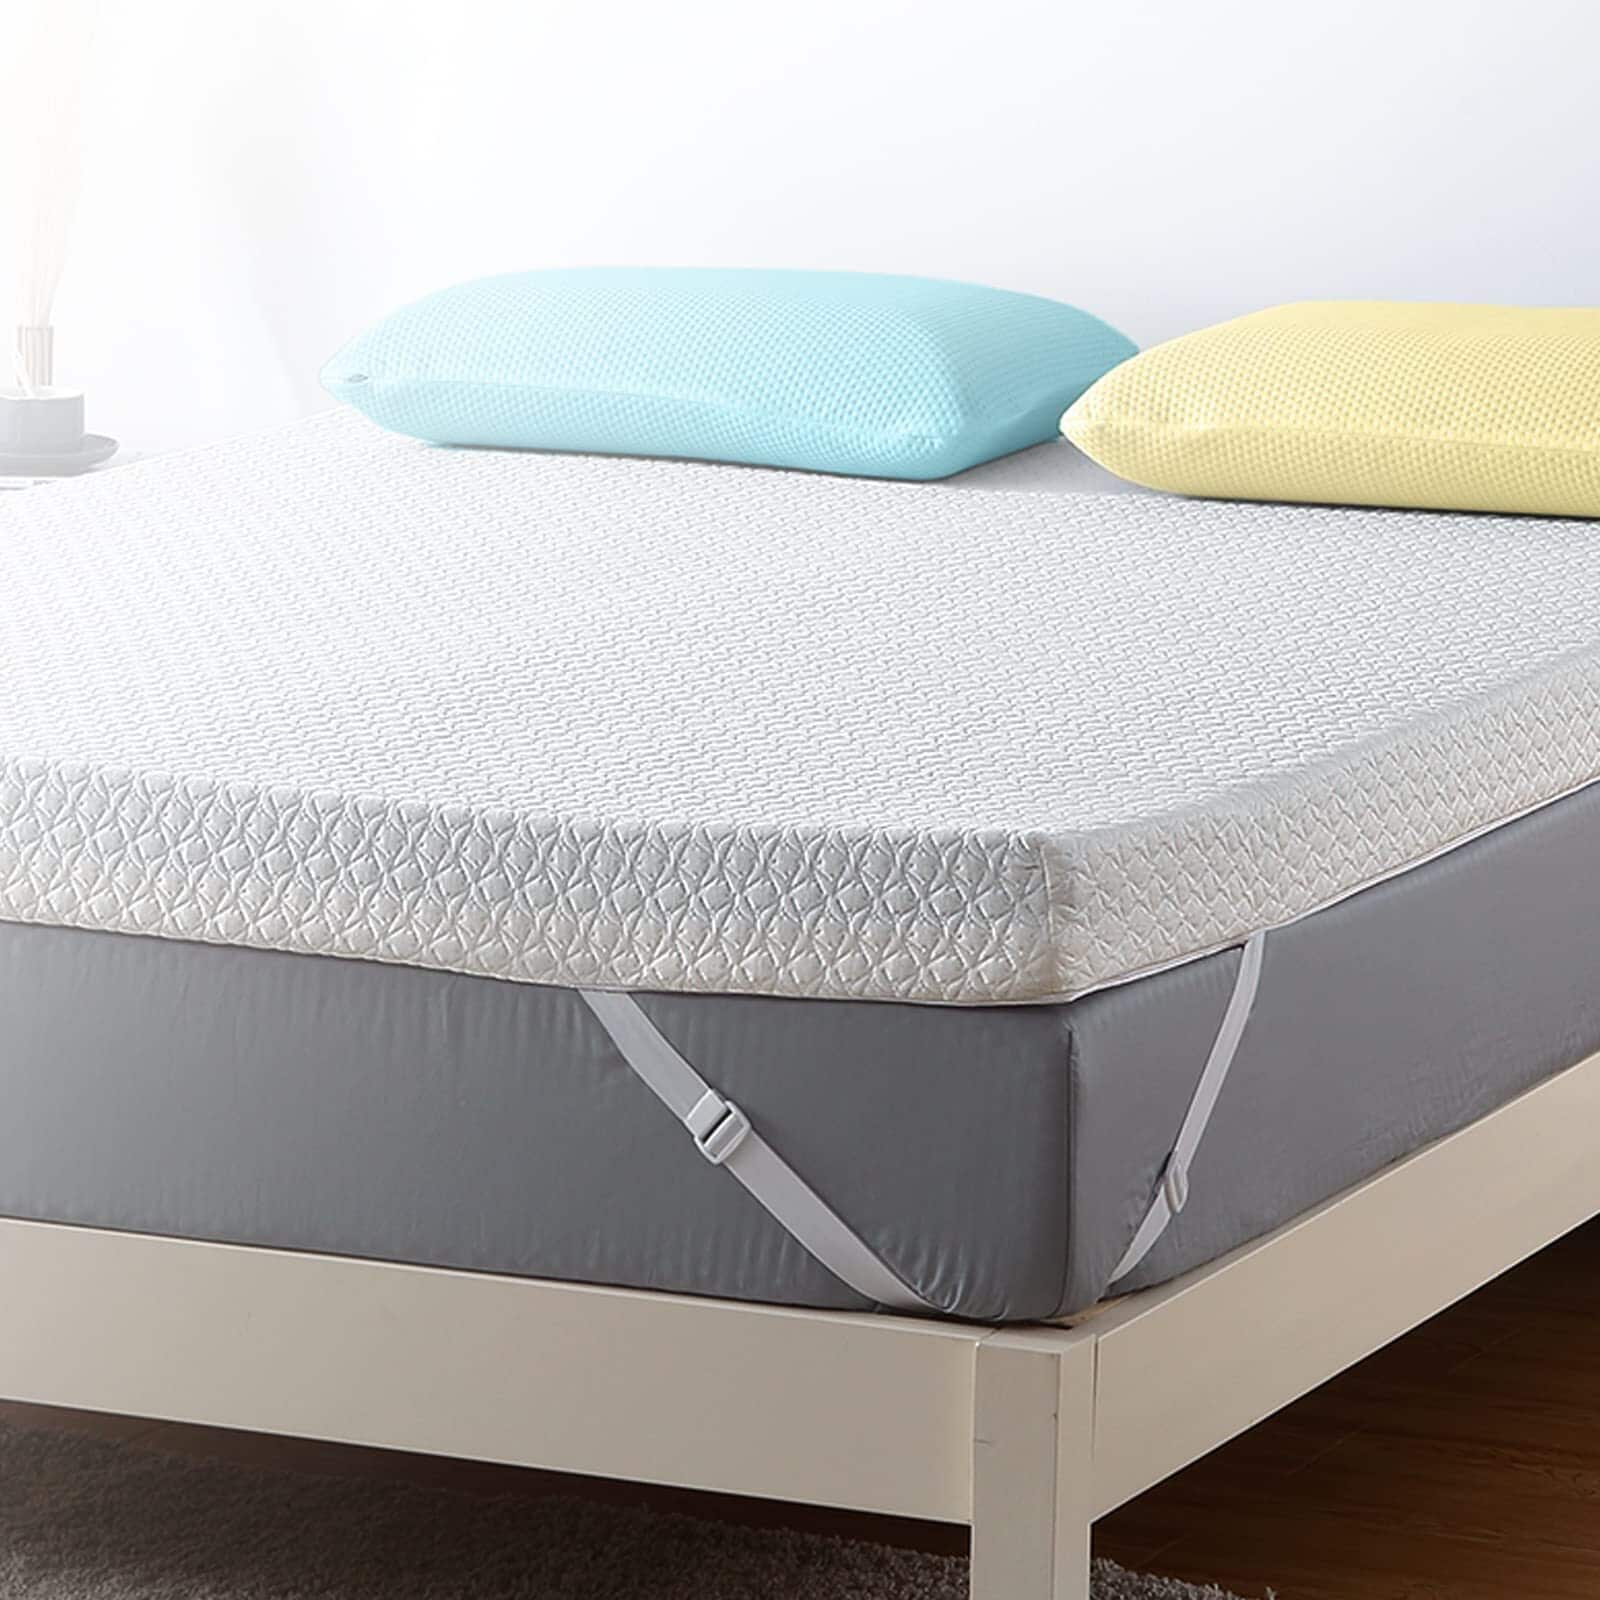 https://ak1.ostkcdn.com/images/products/is/images/direct/860ad2e24dbc626fc7732dc5019d29c1fb4bfb17/4-Inch-Dual-Layer-Memory-Foam-Mattress-Topper-with-Cover.jpg